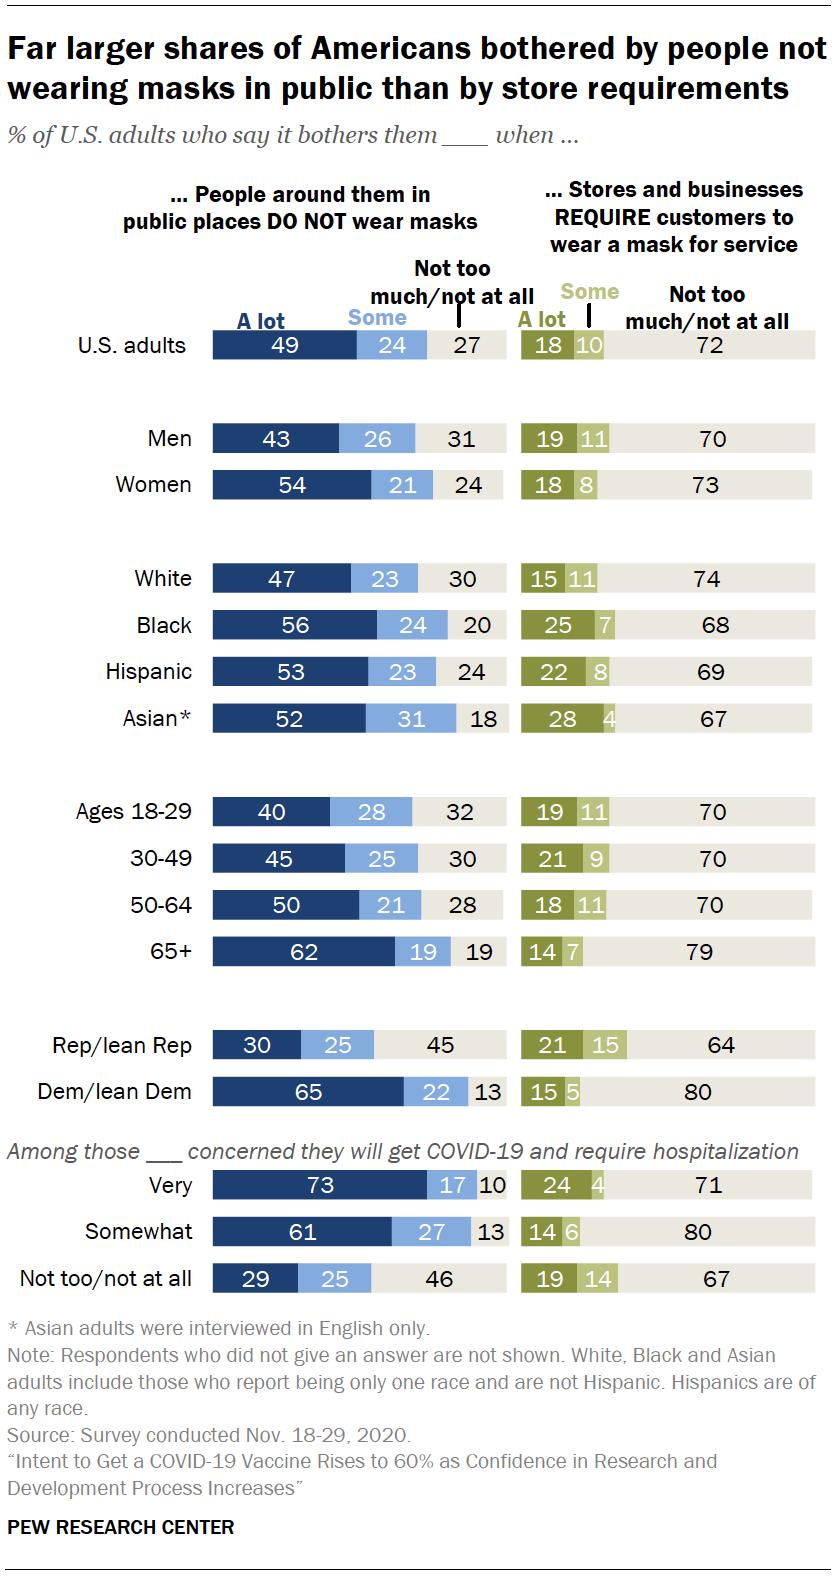 Chart shows far larger shares of Americans bothered by people not wearing masks in public than by store requirements